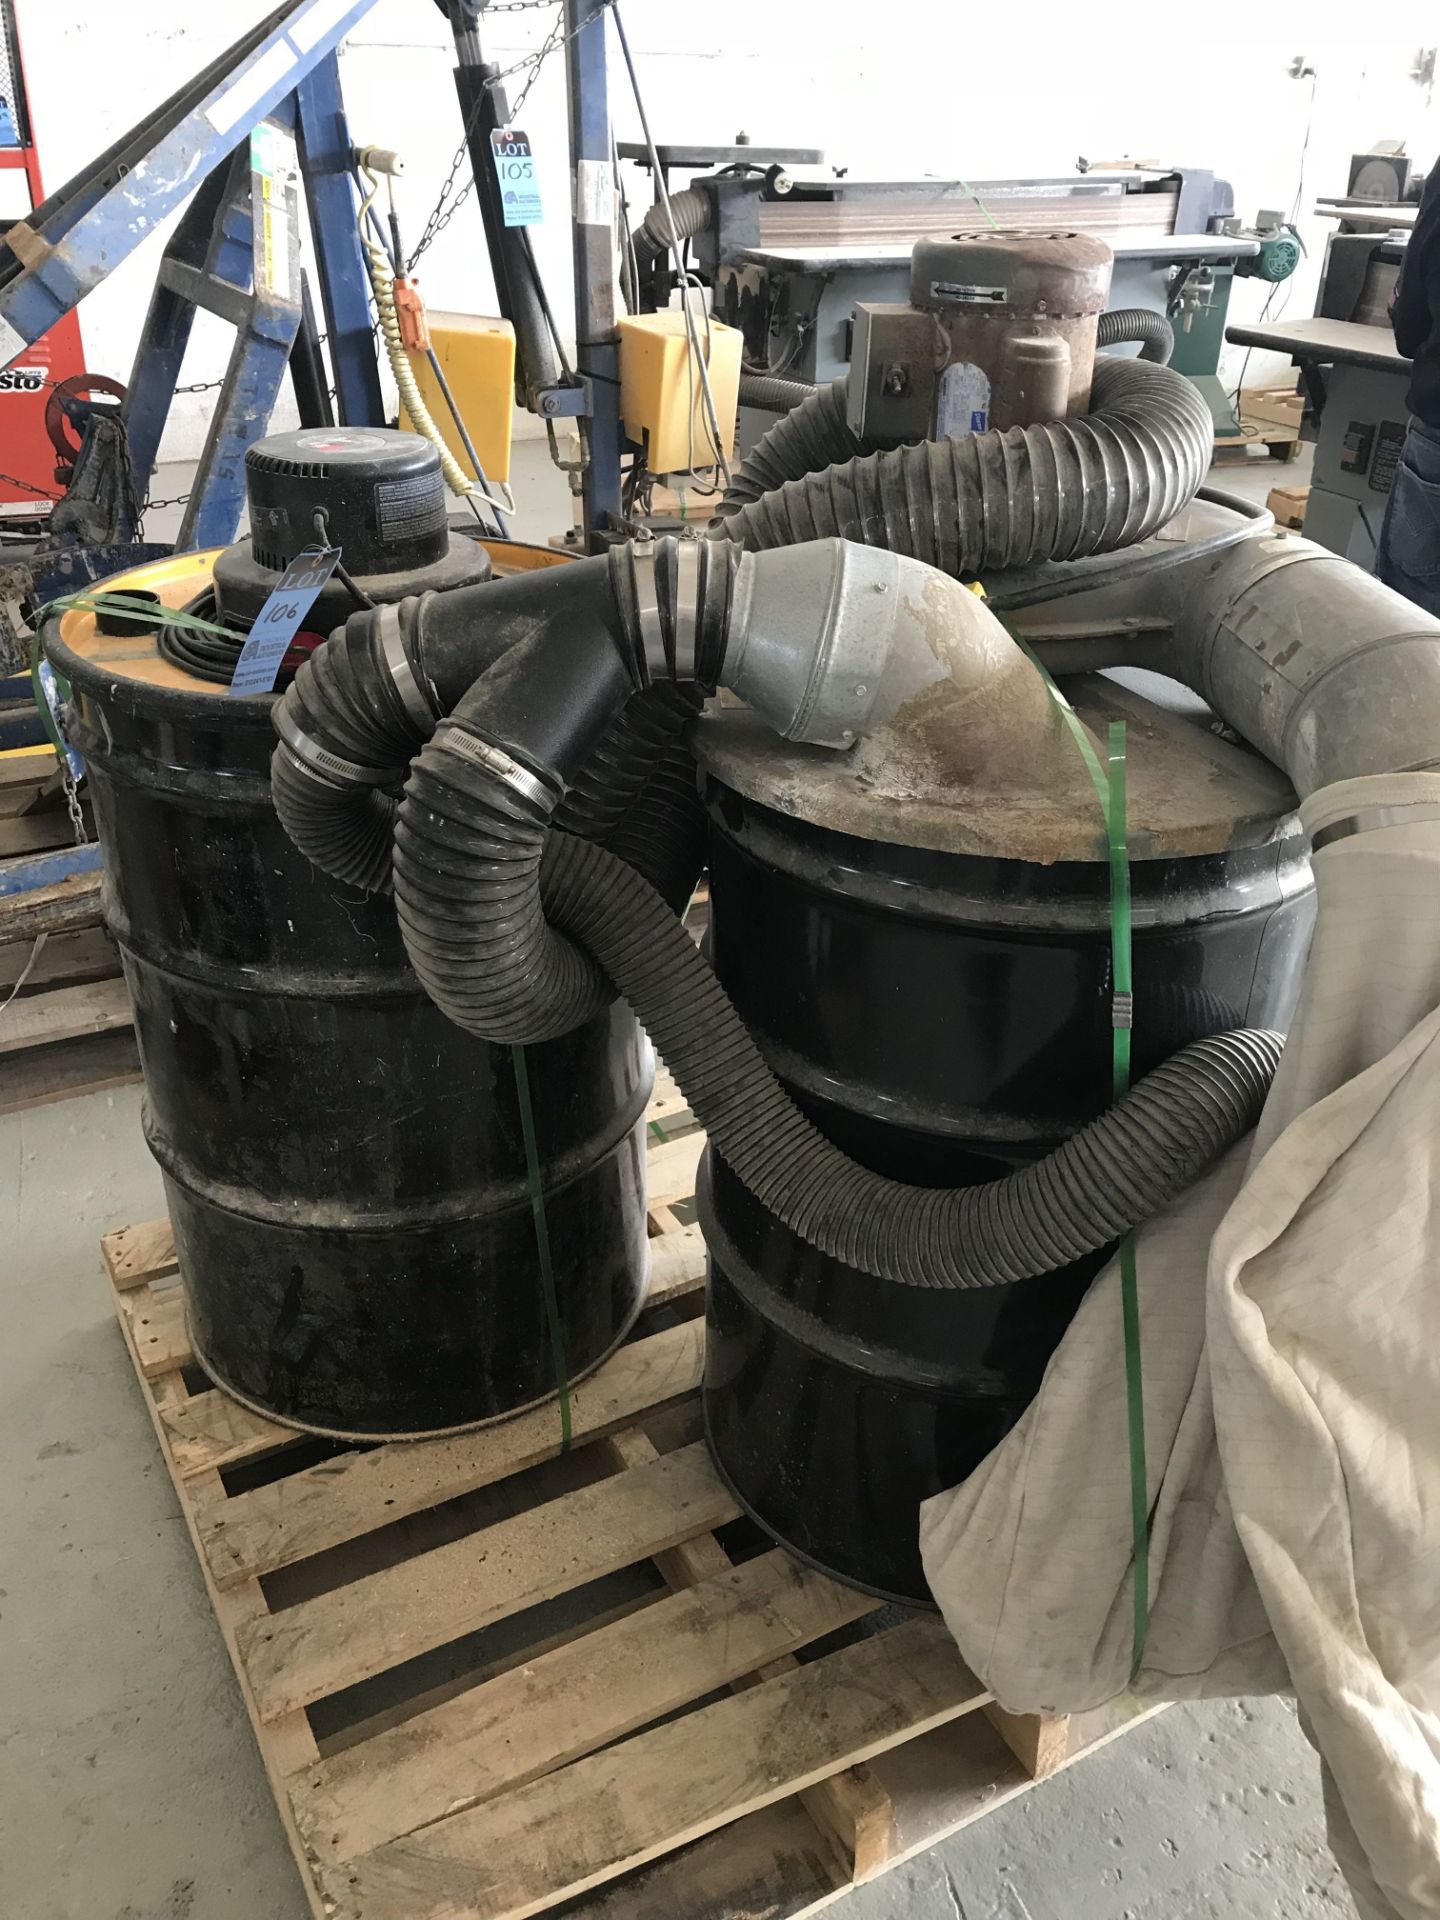 (LOT) (2) 55 GALLON DRUM VACUUMS ON SKID **LOCATED AT 100 SEA RAY DR., FLAGLER BEACH, FL 32136**